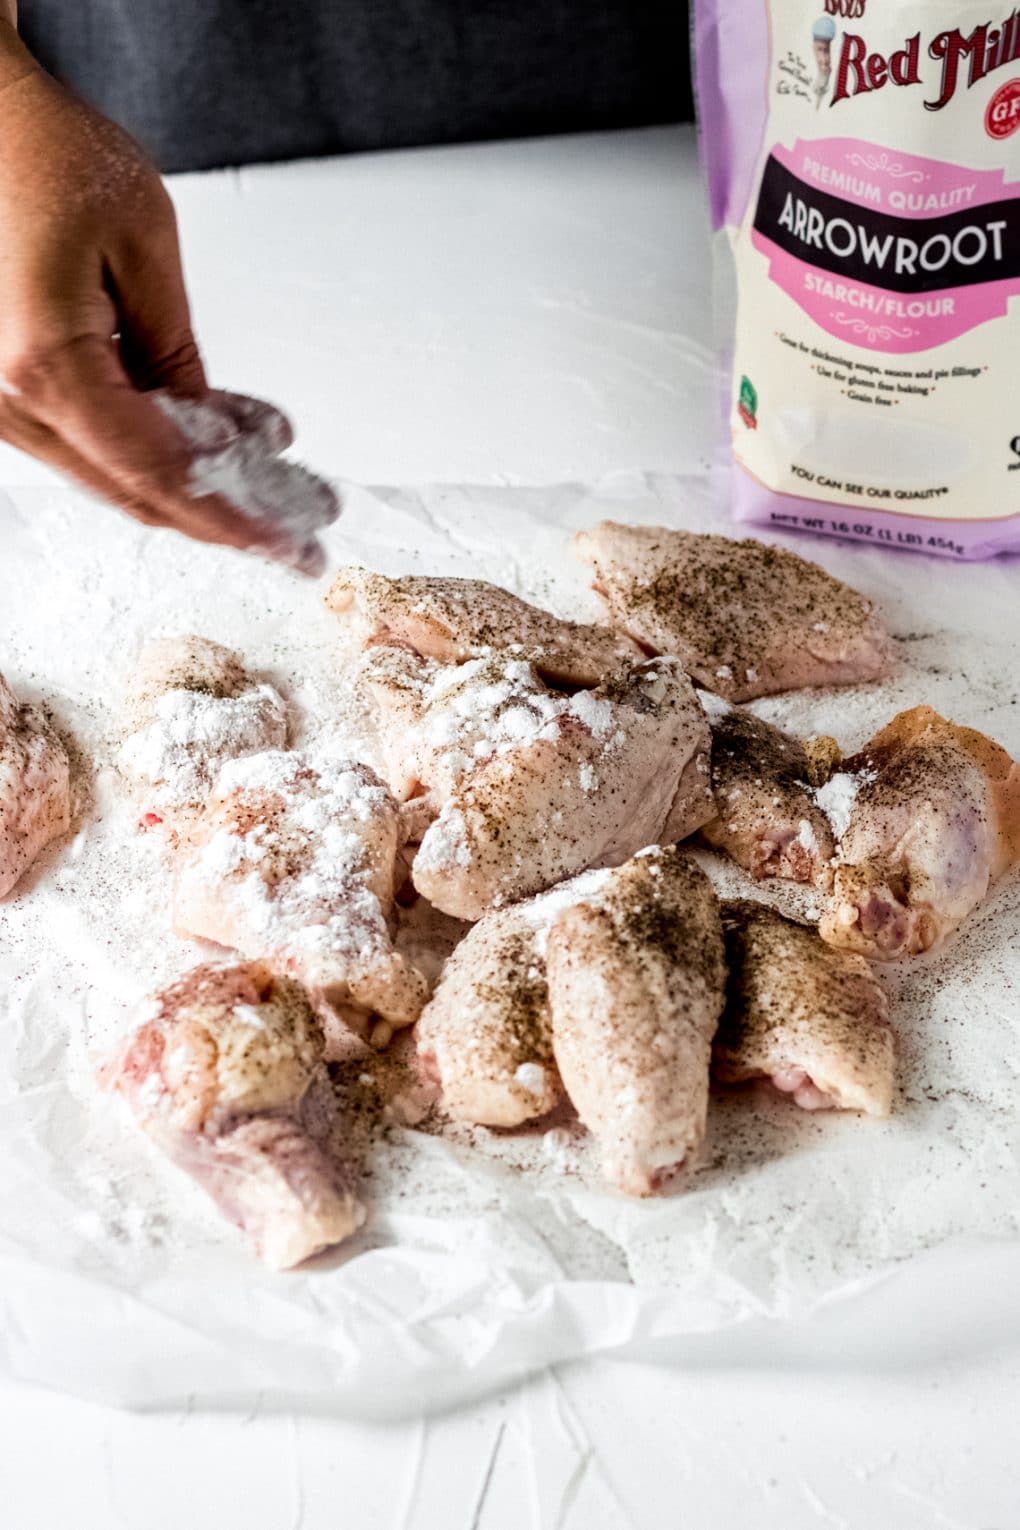 seasoning raw chicken wings with salt, pepper, and arrowroot starch